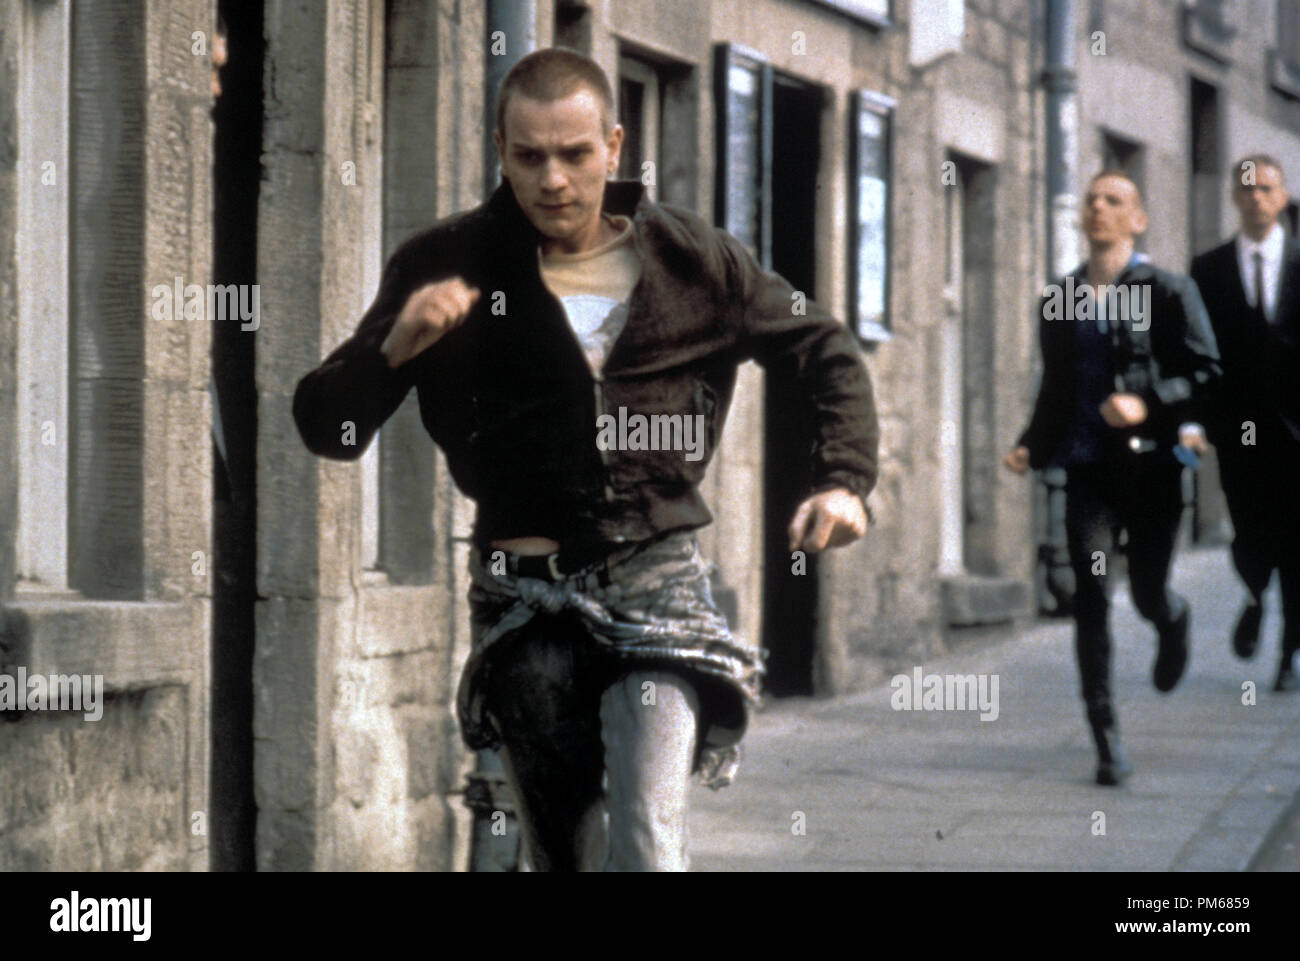 Film Still from 'Trainspotting' Ewan McGregor, Ewen Bremner 1996 © 1996 Miramax Photo Credit: Liam Longman  File Reference # 31042067THA  For Editorial Use Only - All Rights Reserved Stock Photo